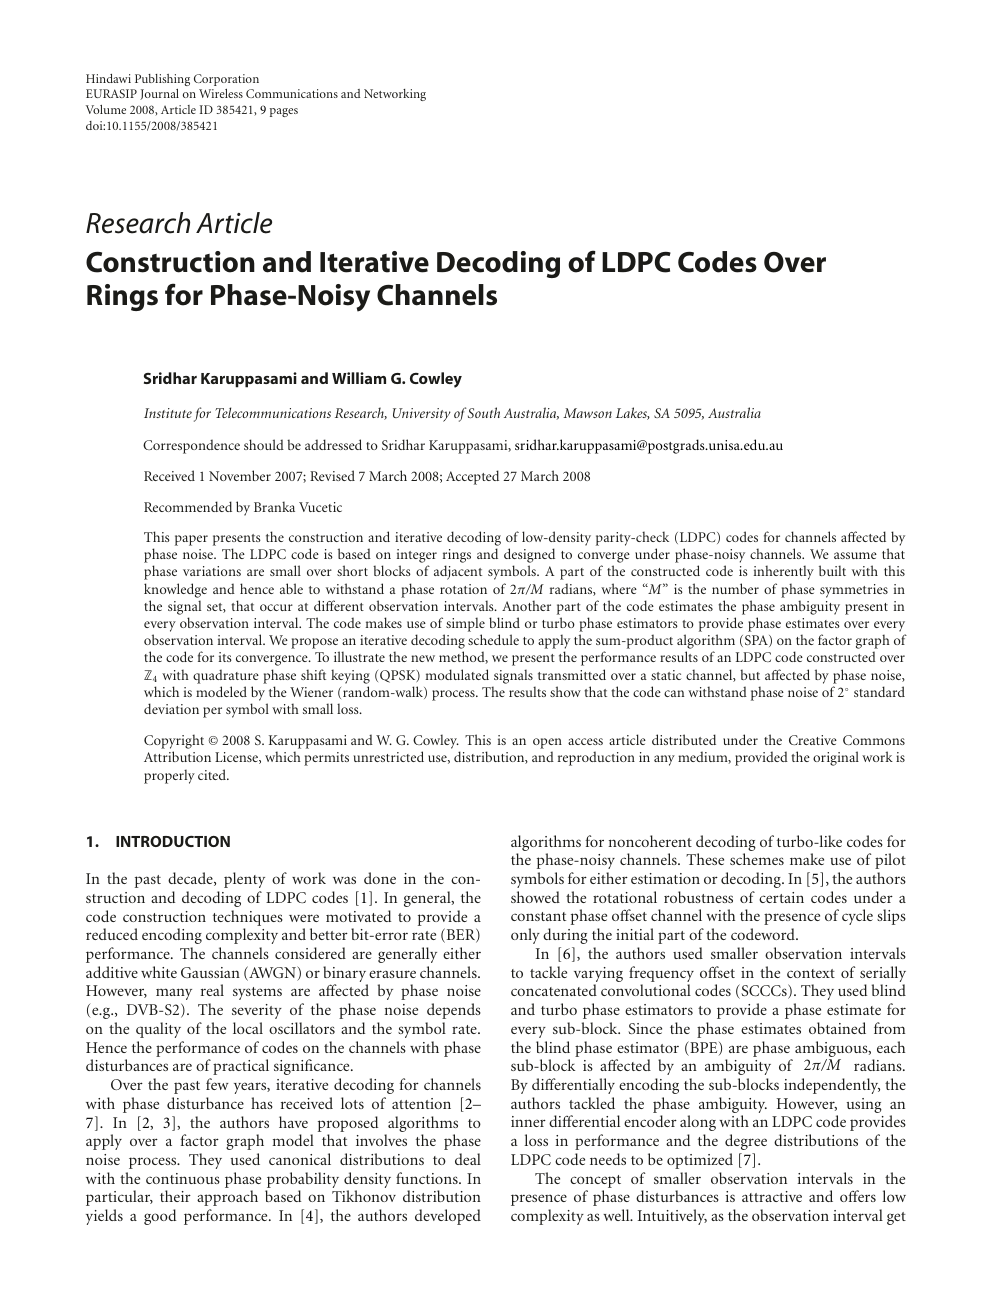 Construction And Iterative Decoding Of Ldpc Codes Over Rings For